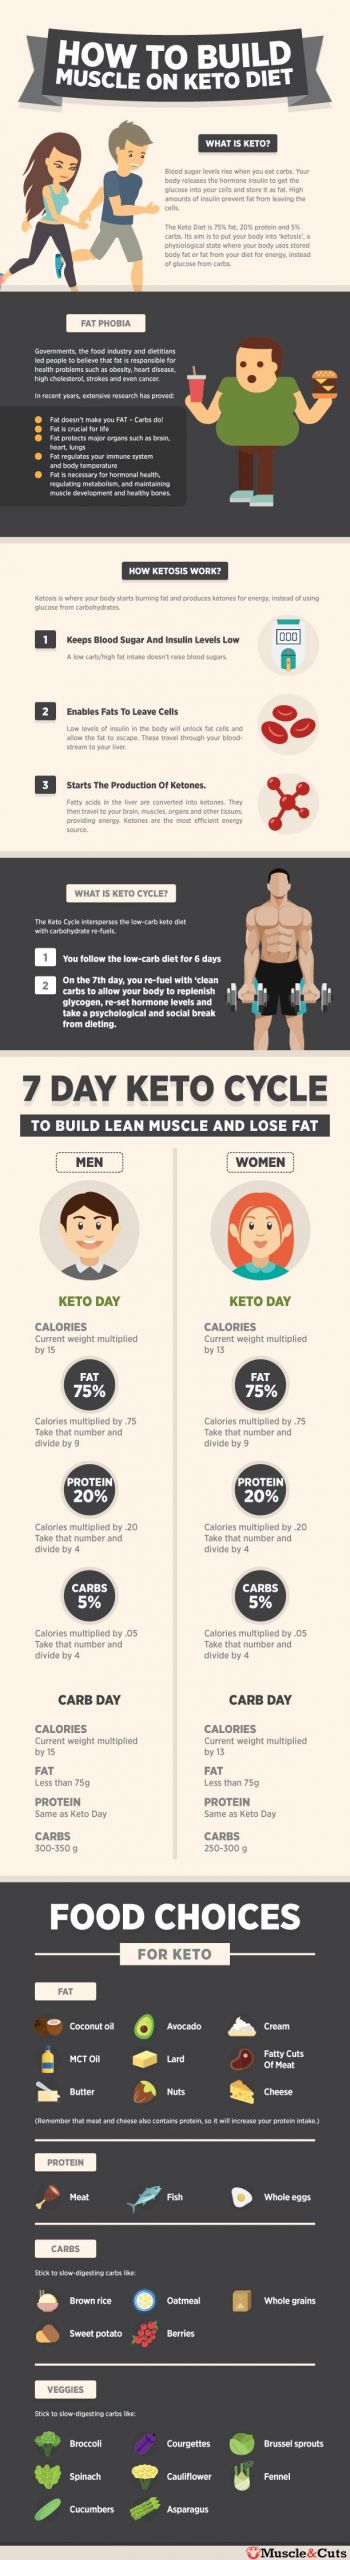 Building Muscle On Keto Diet
 Can I Build Muscle Keto Cycle Diet [ Here And